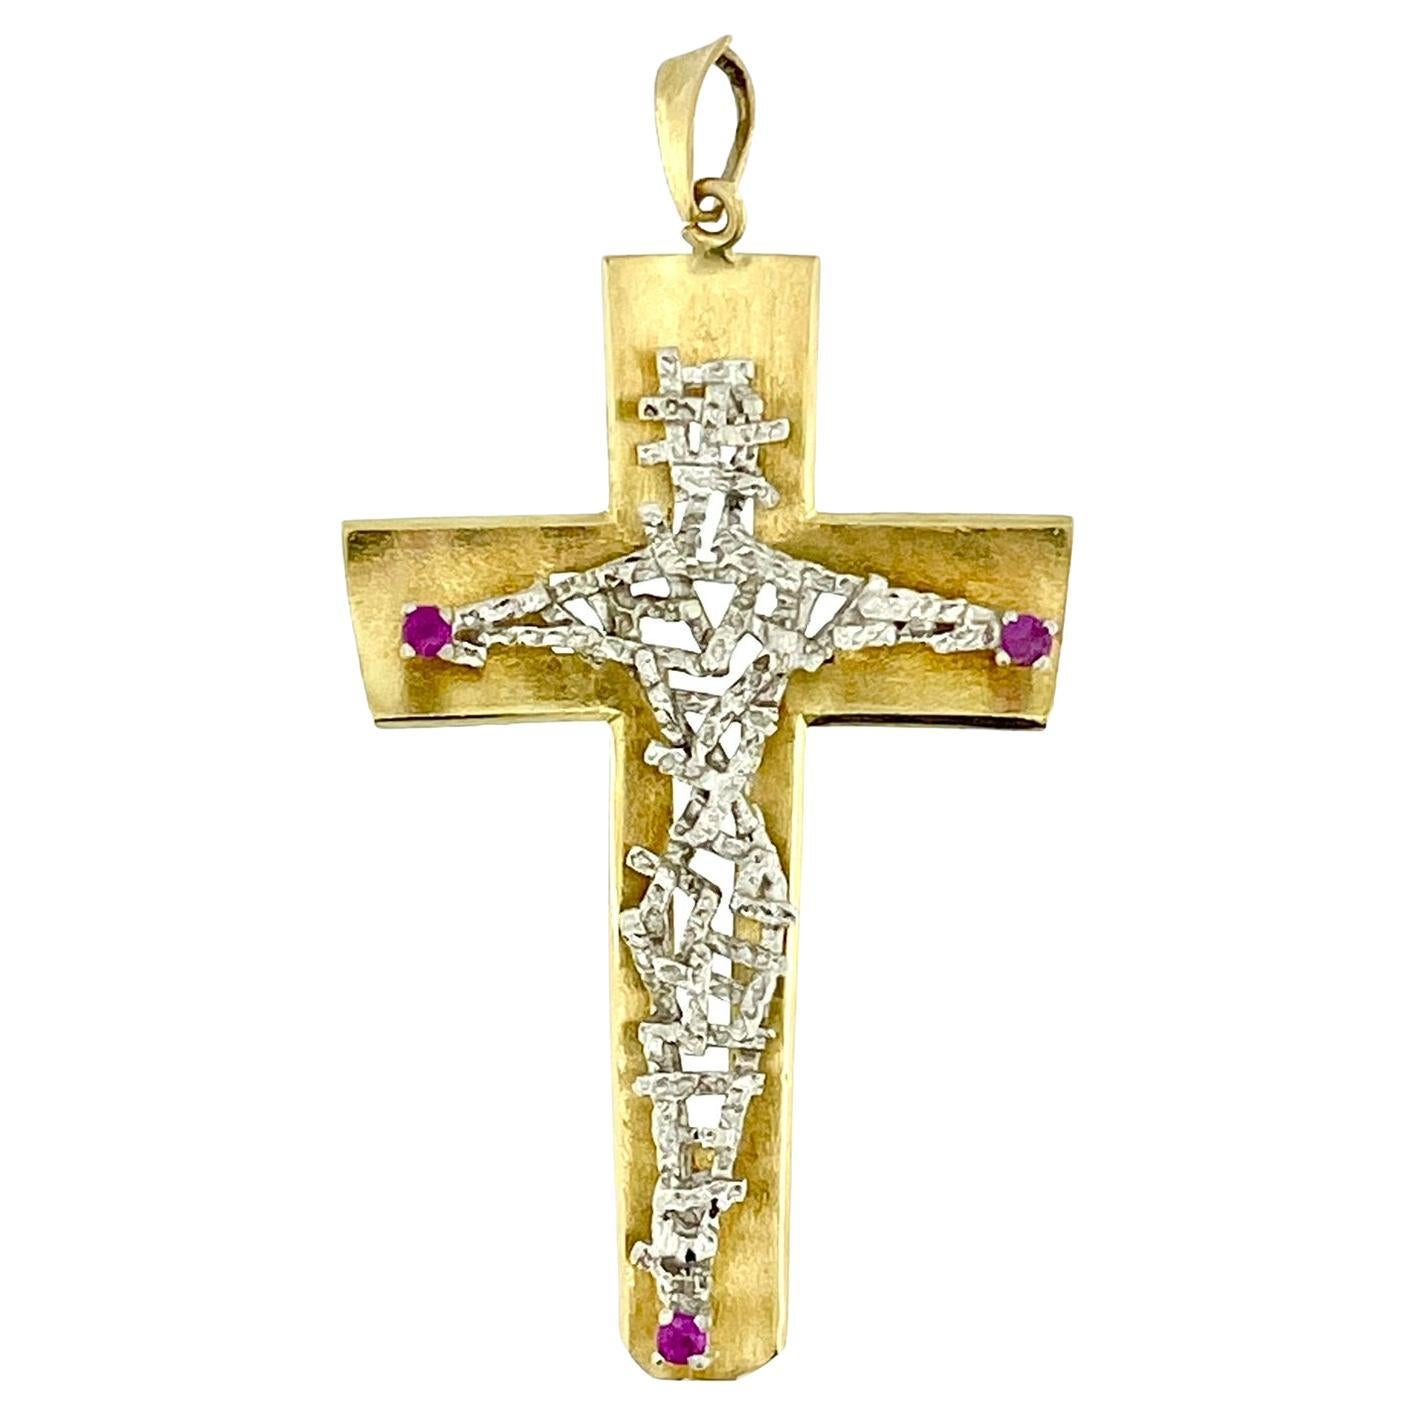 Hand-Made 18kt Gold Italian Crucifix with Rubies